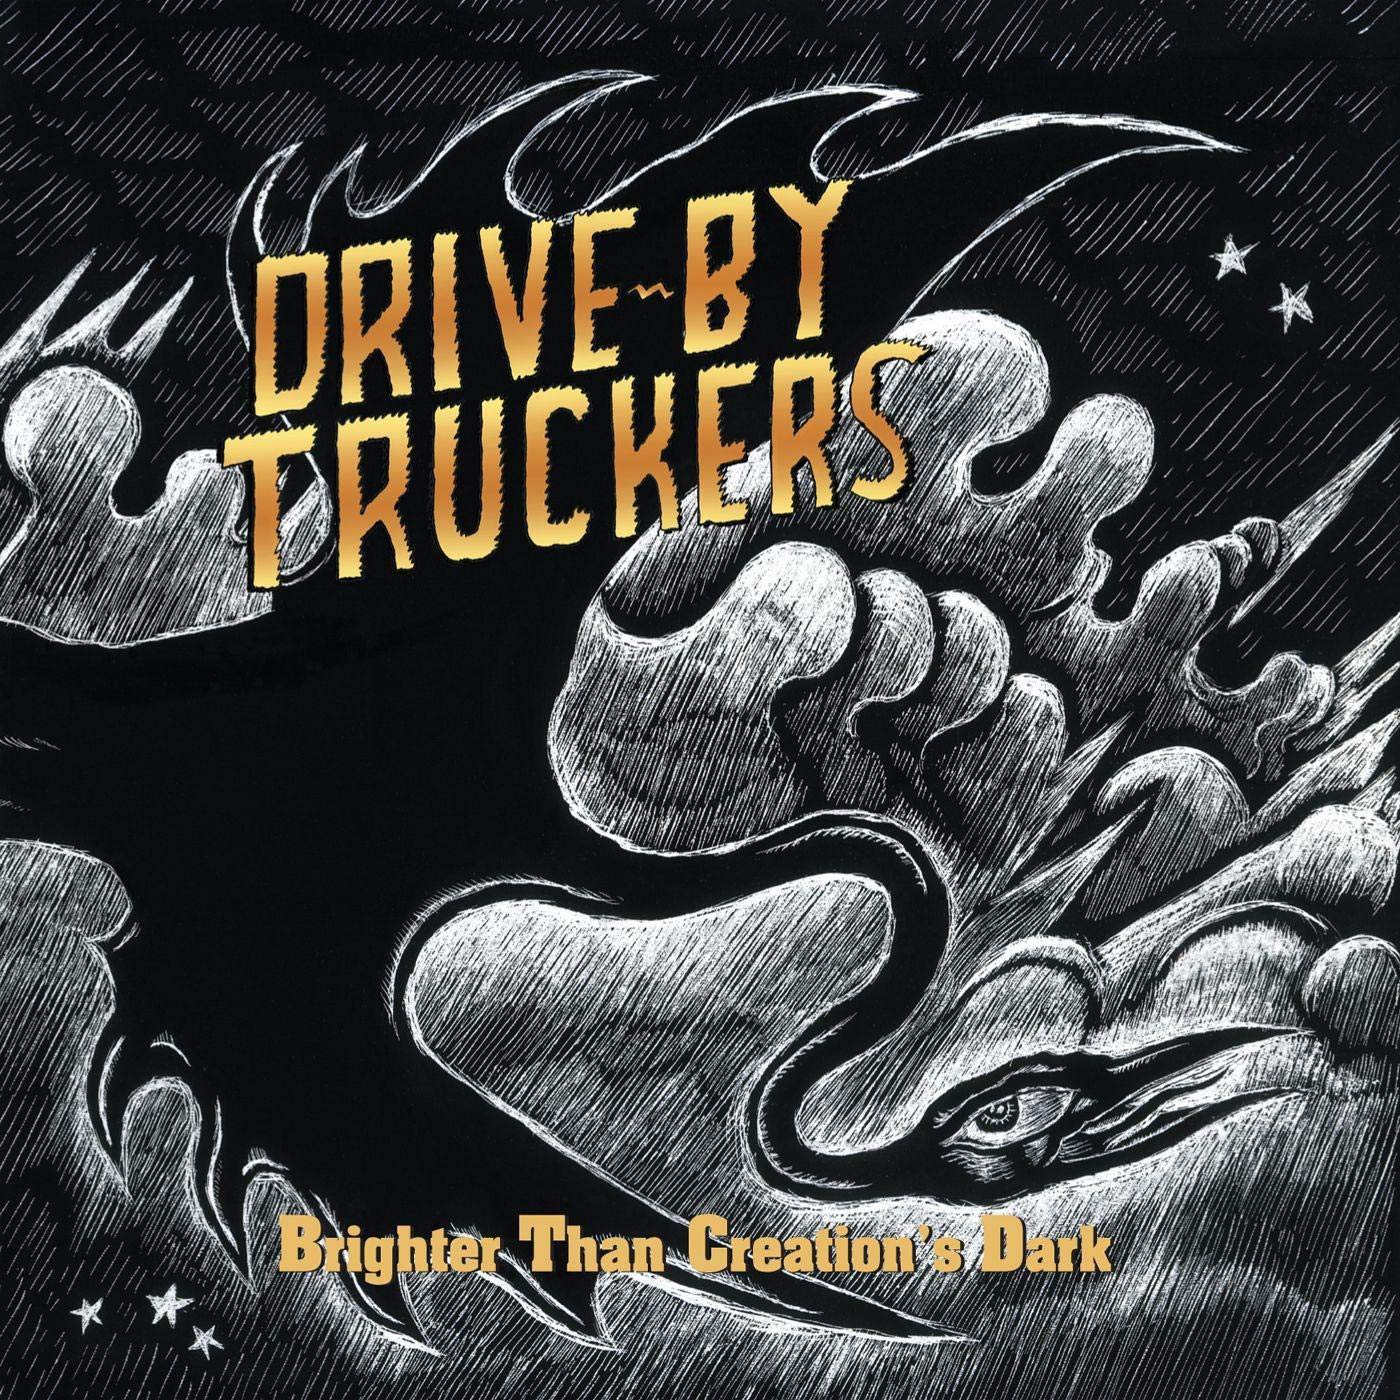 Drive-By Truckers | Brighter Than Creation's Dark | CD